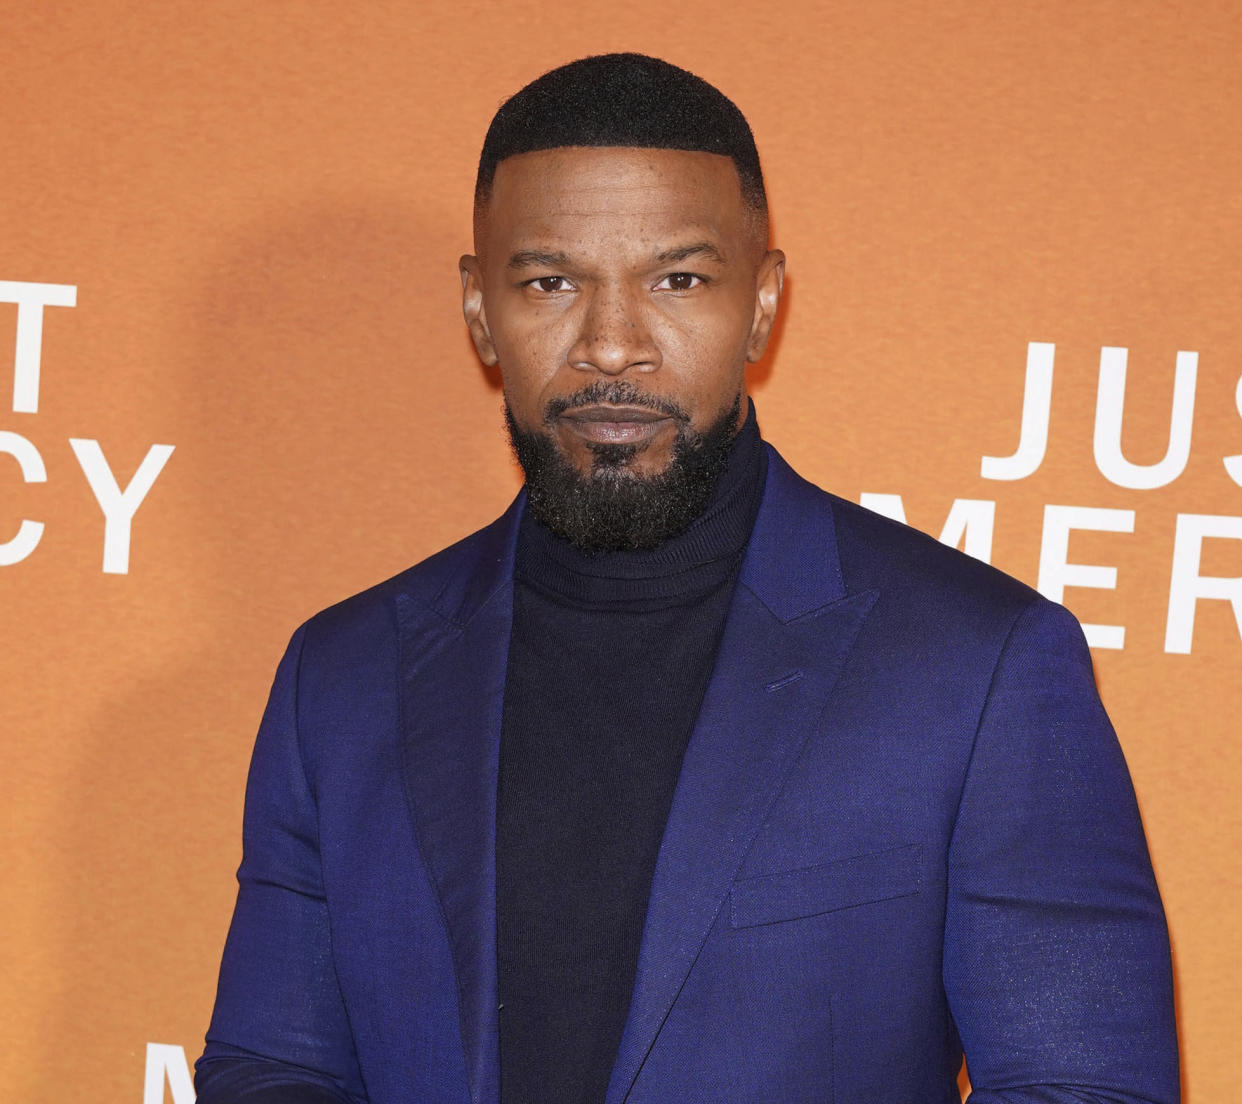 Jamie Foxx was seen for the first time in Chicago over the weekend since suffering a medical complication.